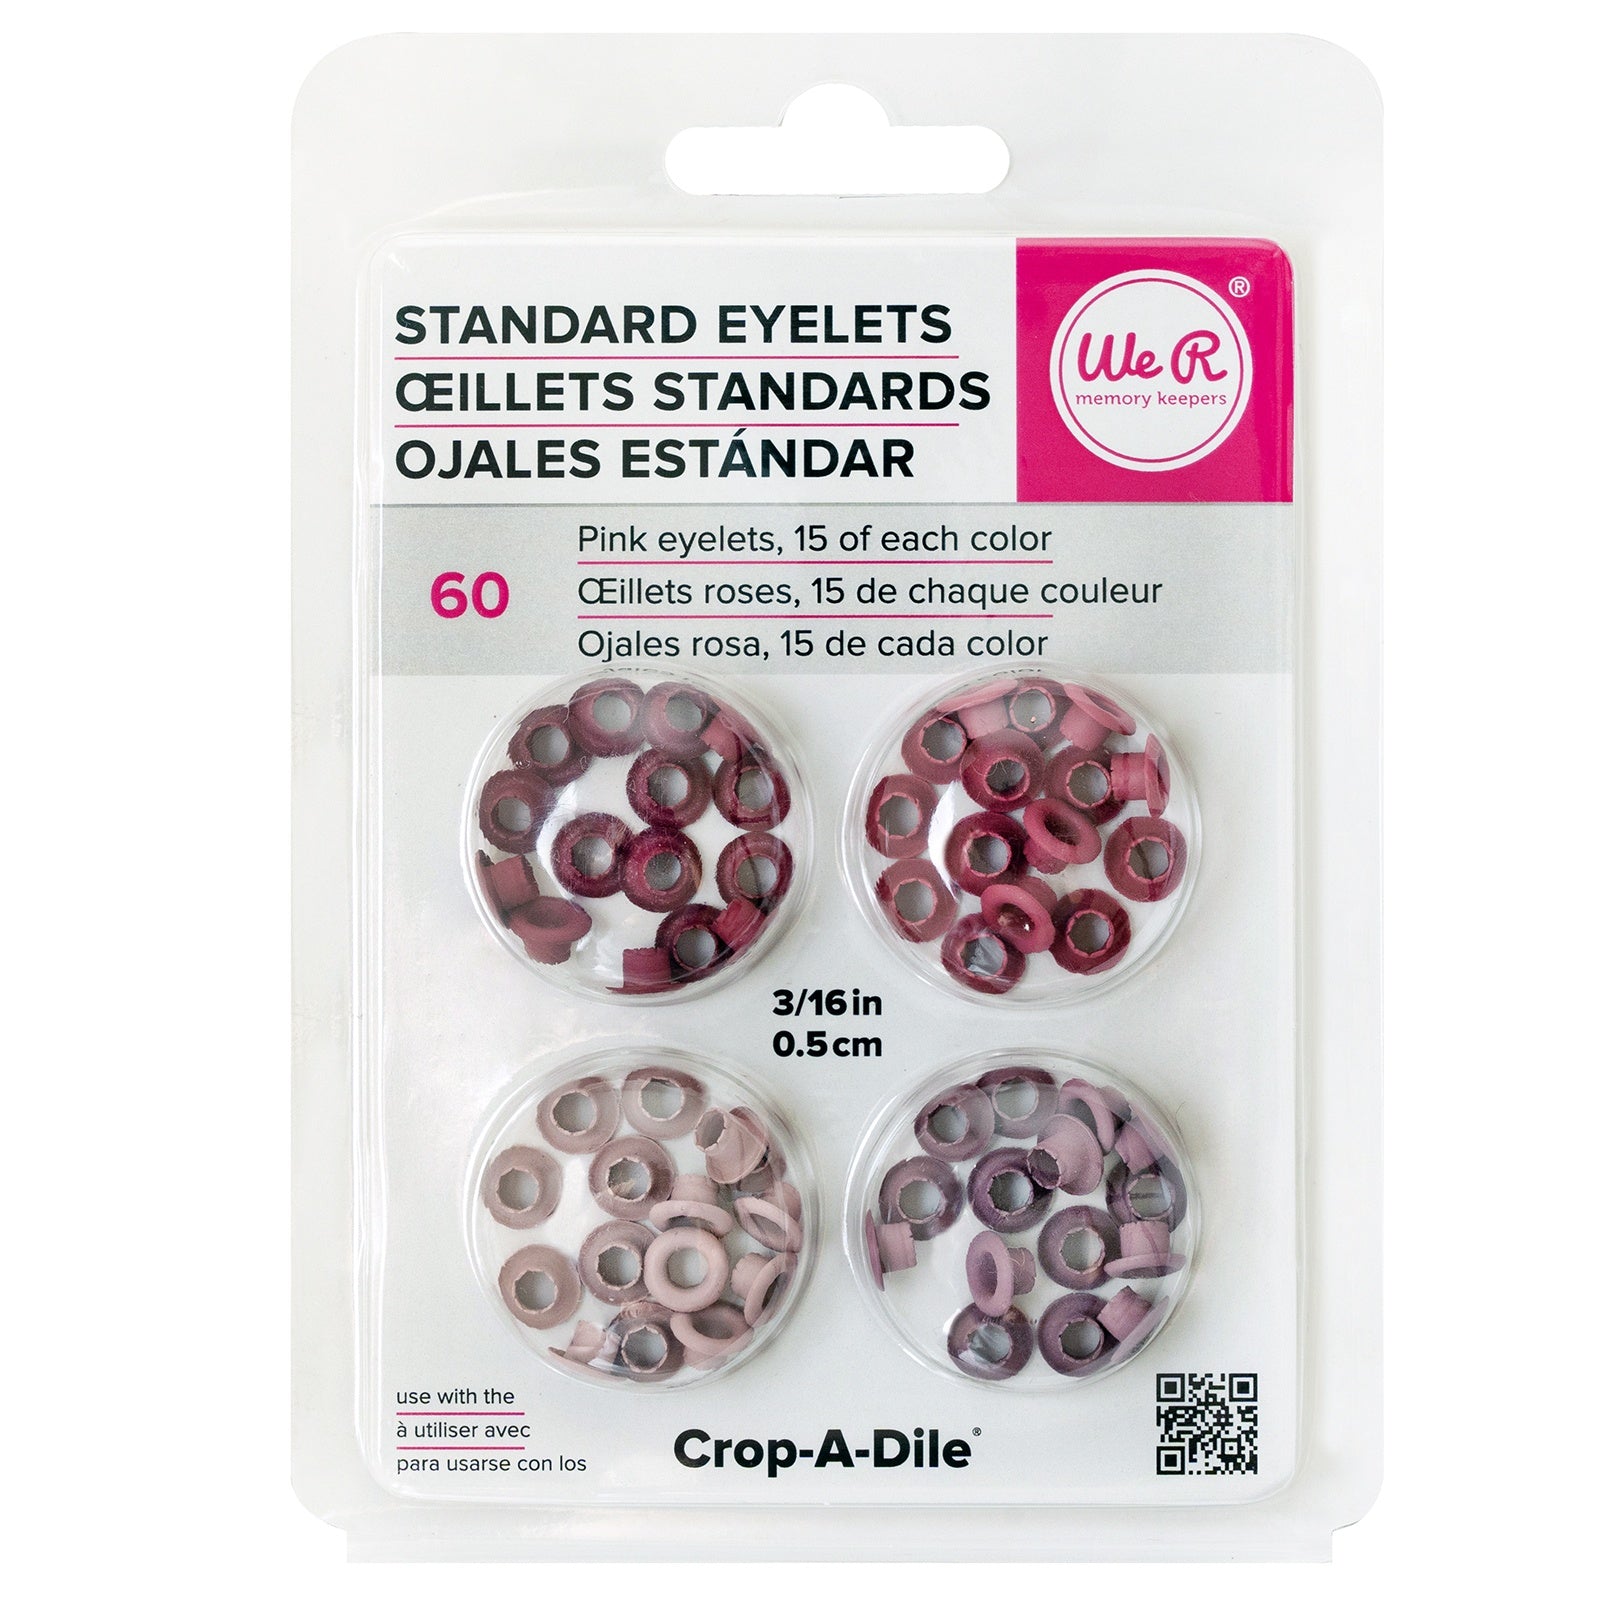 Crop-a-dile Eyelet By We R Memory Keepers, Blue Comfort Handle, Cadtool  Pink. For Adding Eyelets, Grommets, Embellishments - Notebook - AliExpress